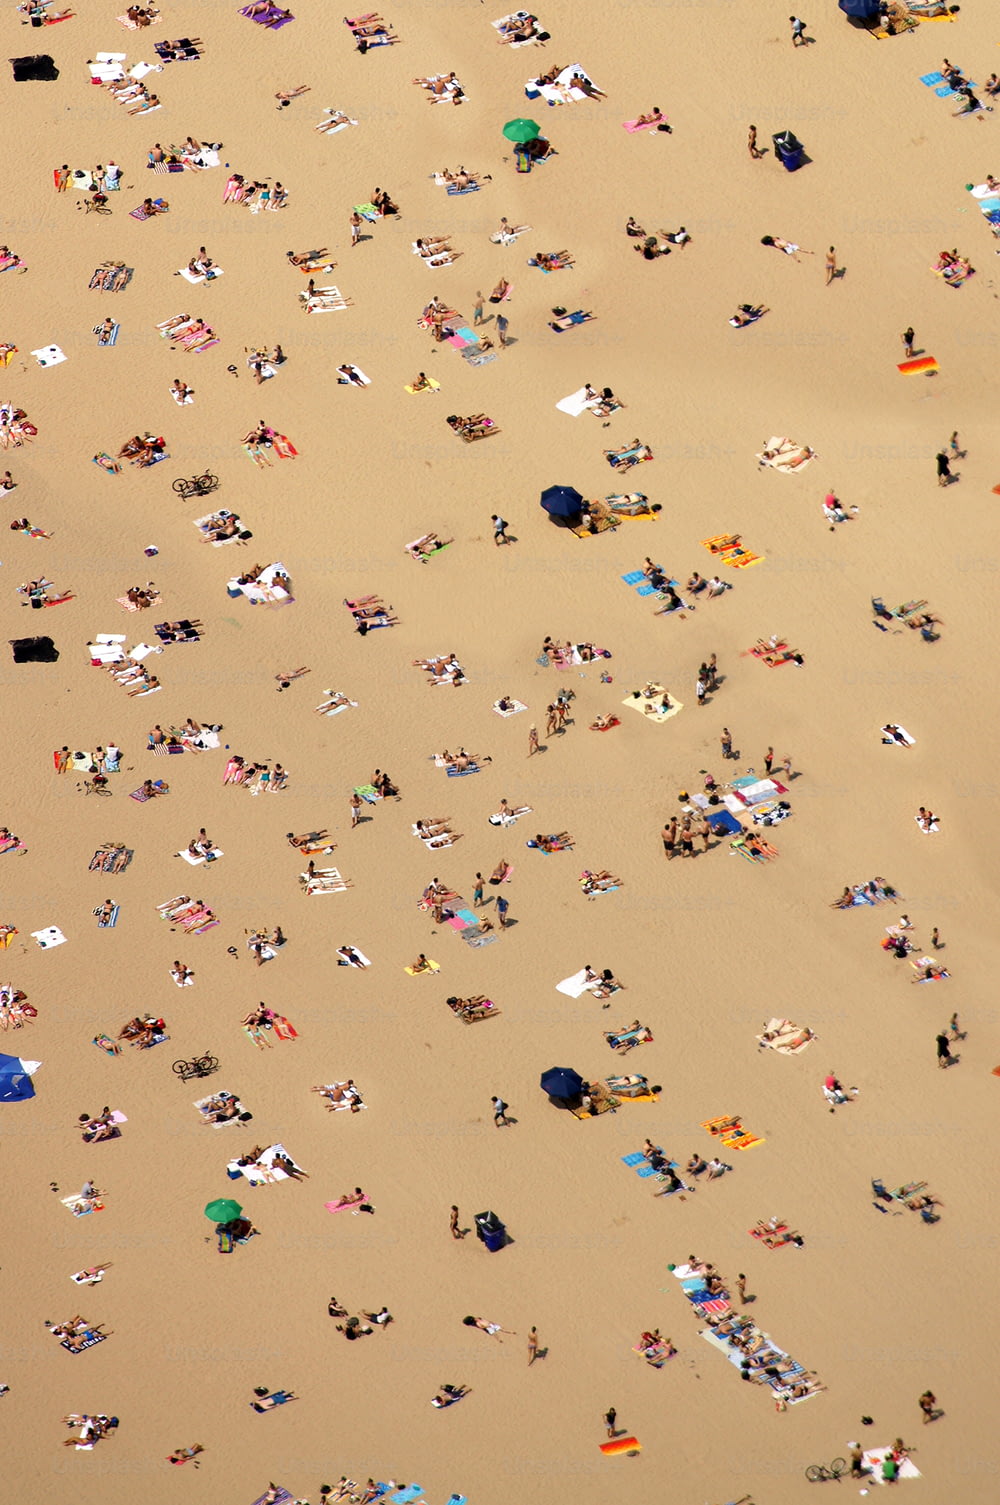 a large group of people laying on top of a sandy beach